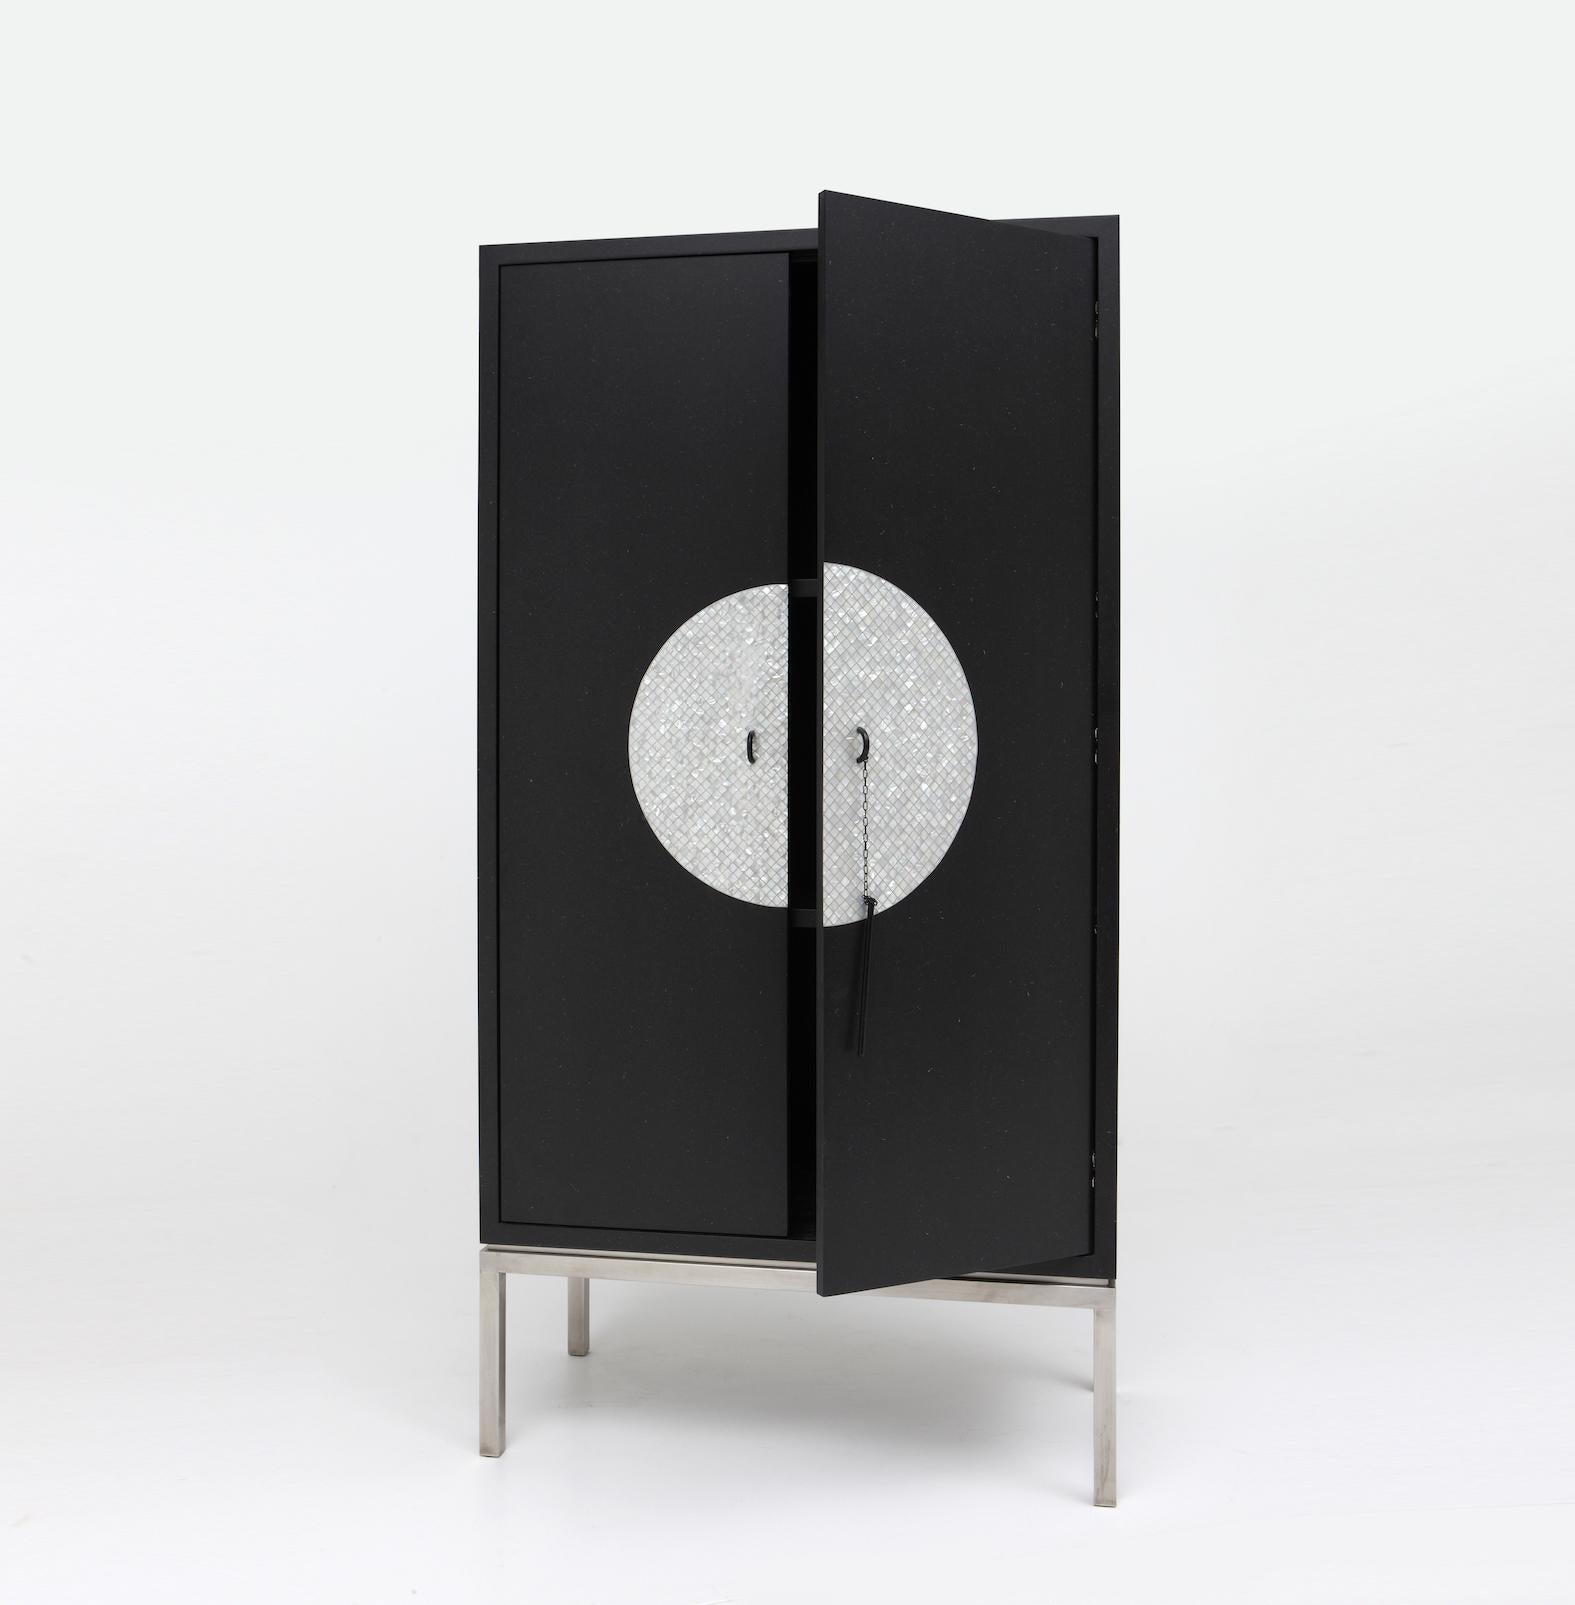 The Moon cabinet is crafted in painted MDF with a circular pattern in mother of pearl. This cabinet sits with carefully balanced proportion on a natural steel frame.